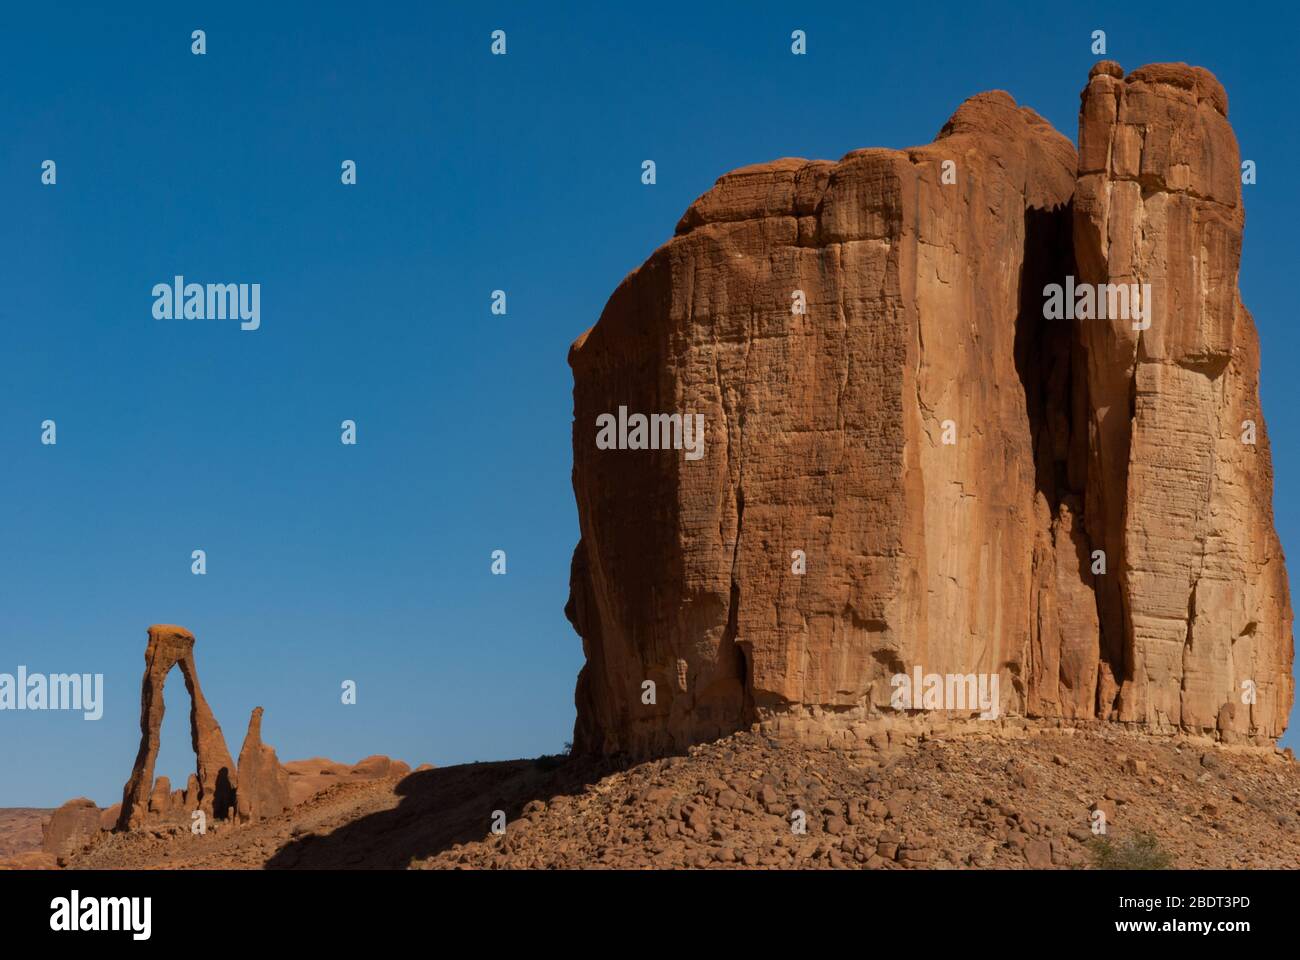 Abstract rocks formation at plateau Ennedi, one in lyre shape in the background, in Sahara desert, Chad, Adrica Stock Photo